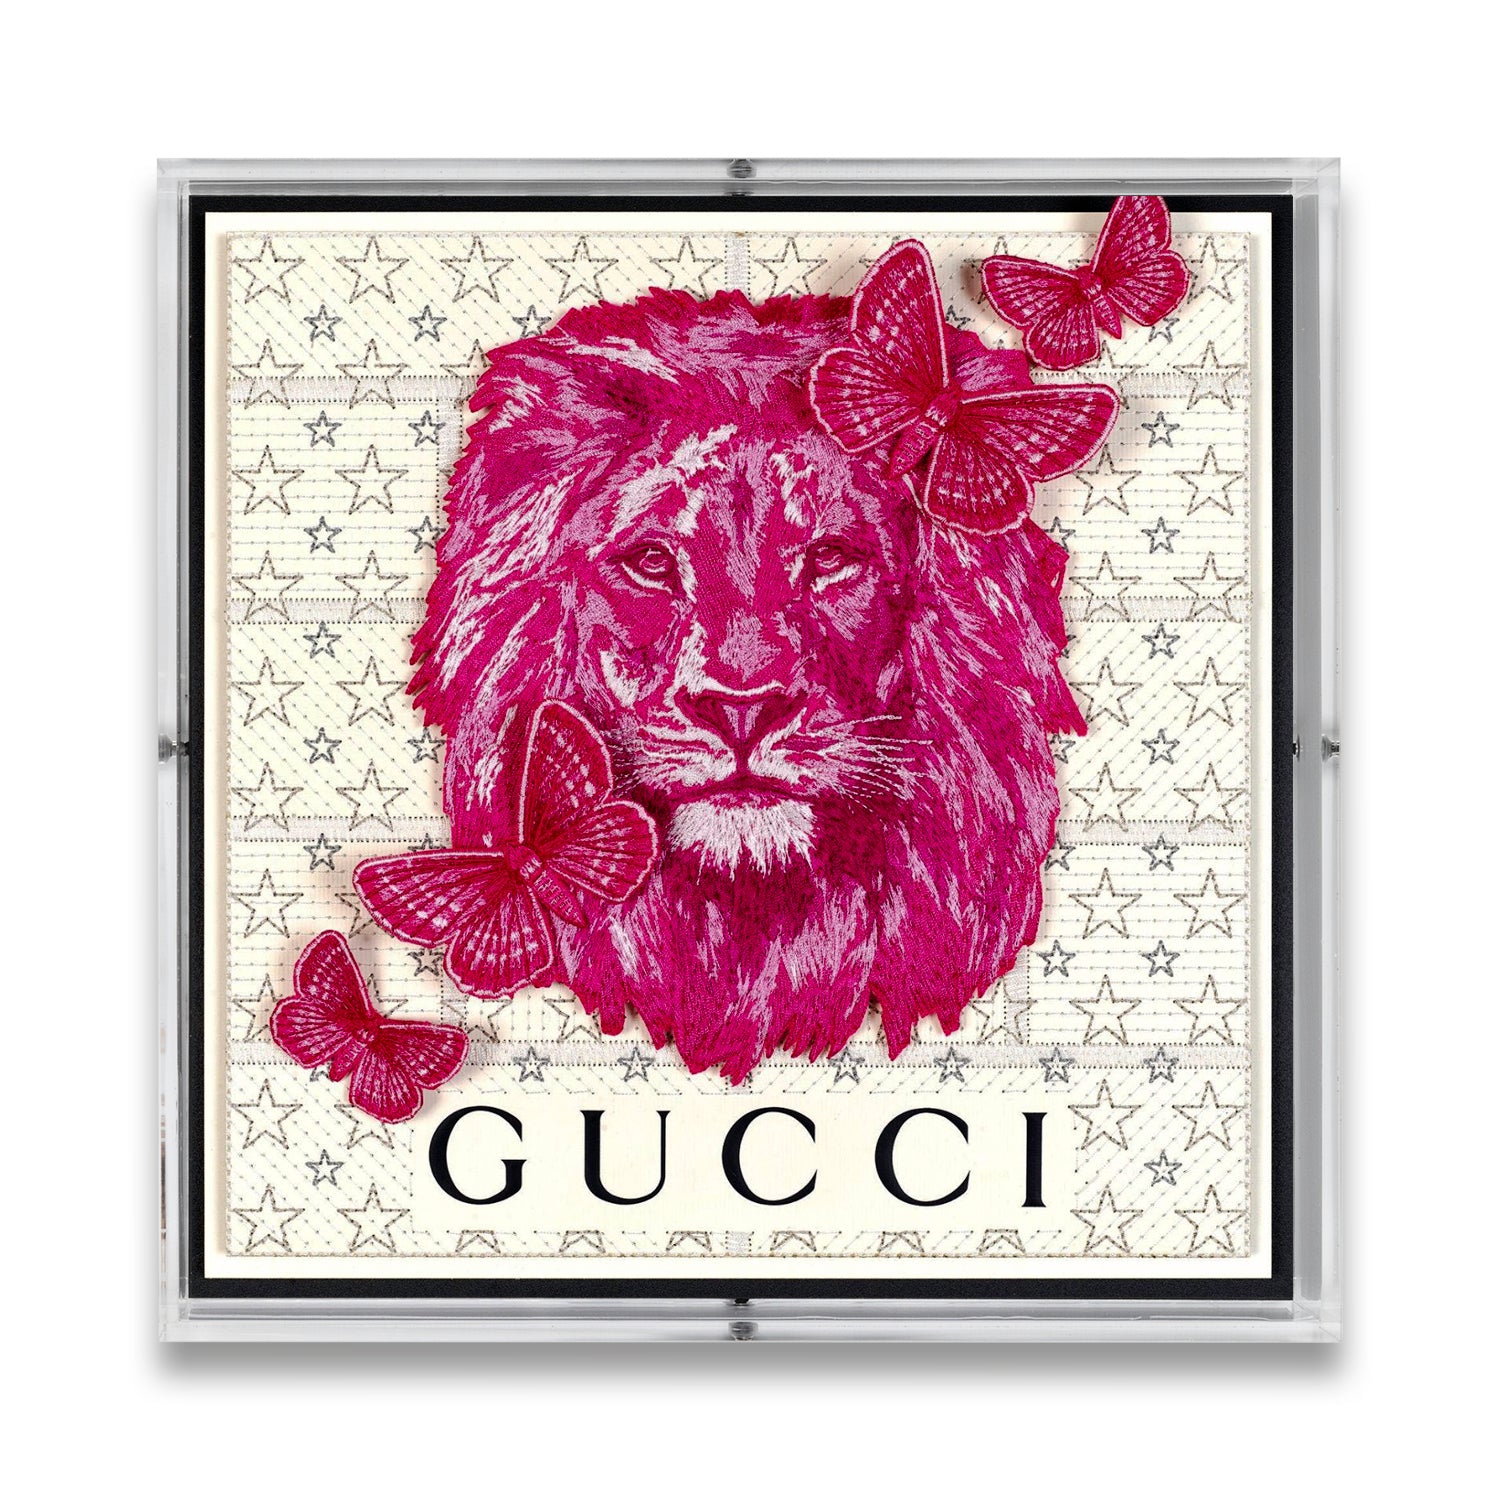 Gucci White Strength by Stephen Wilson (12x12x2